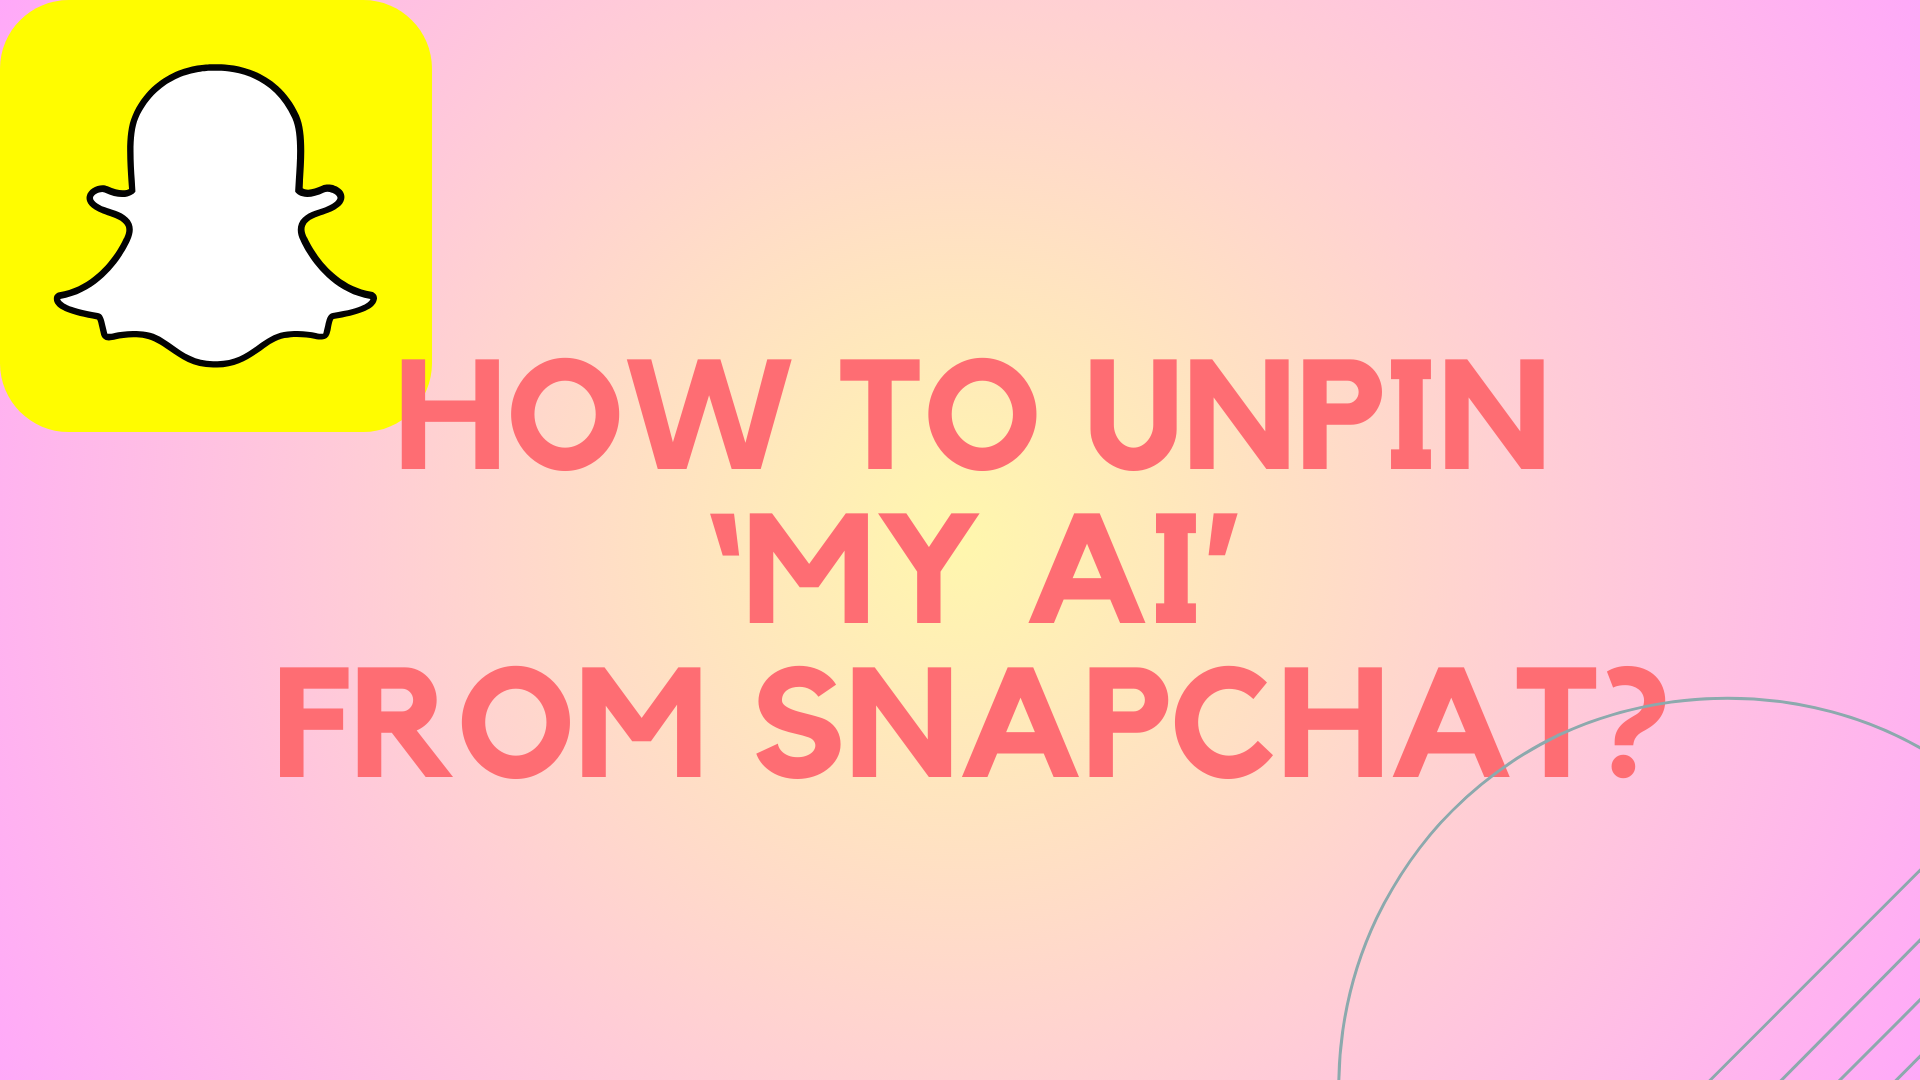 Cover Image for How to Unpin 'My AI' From Snapchat?